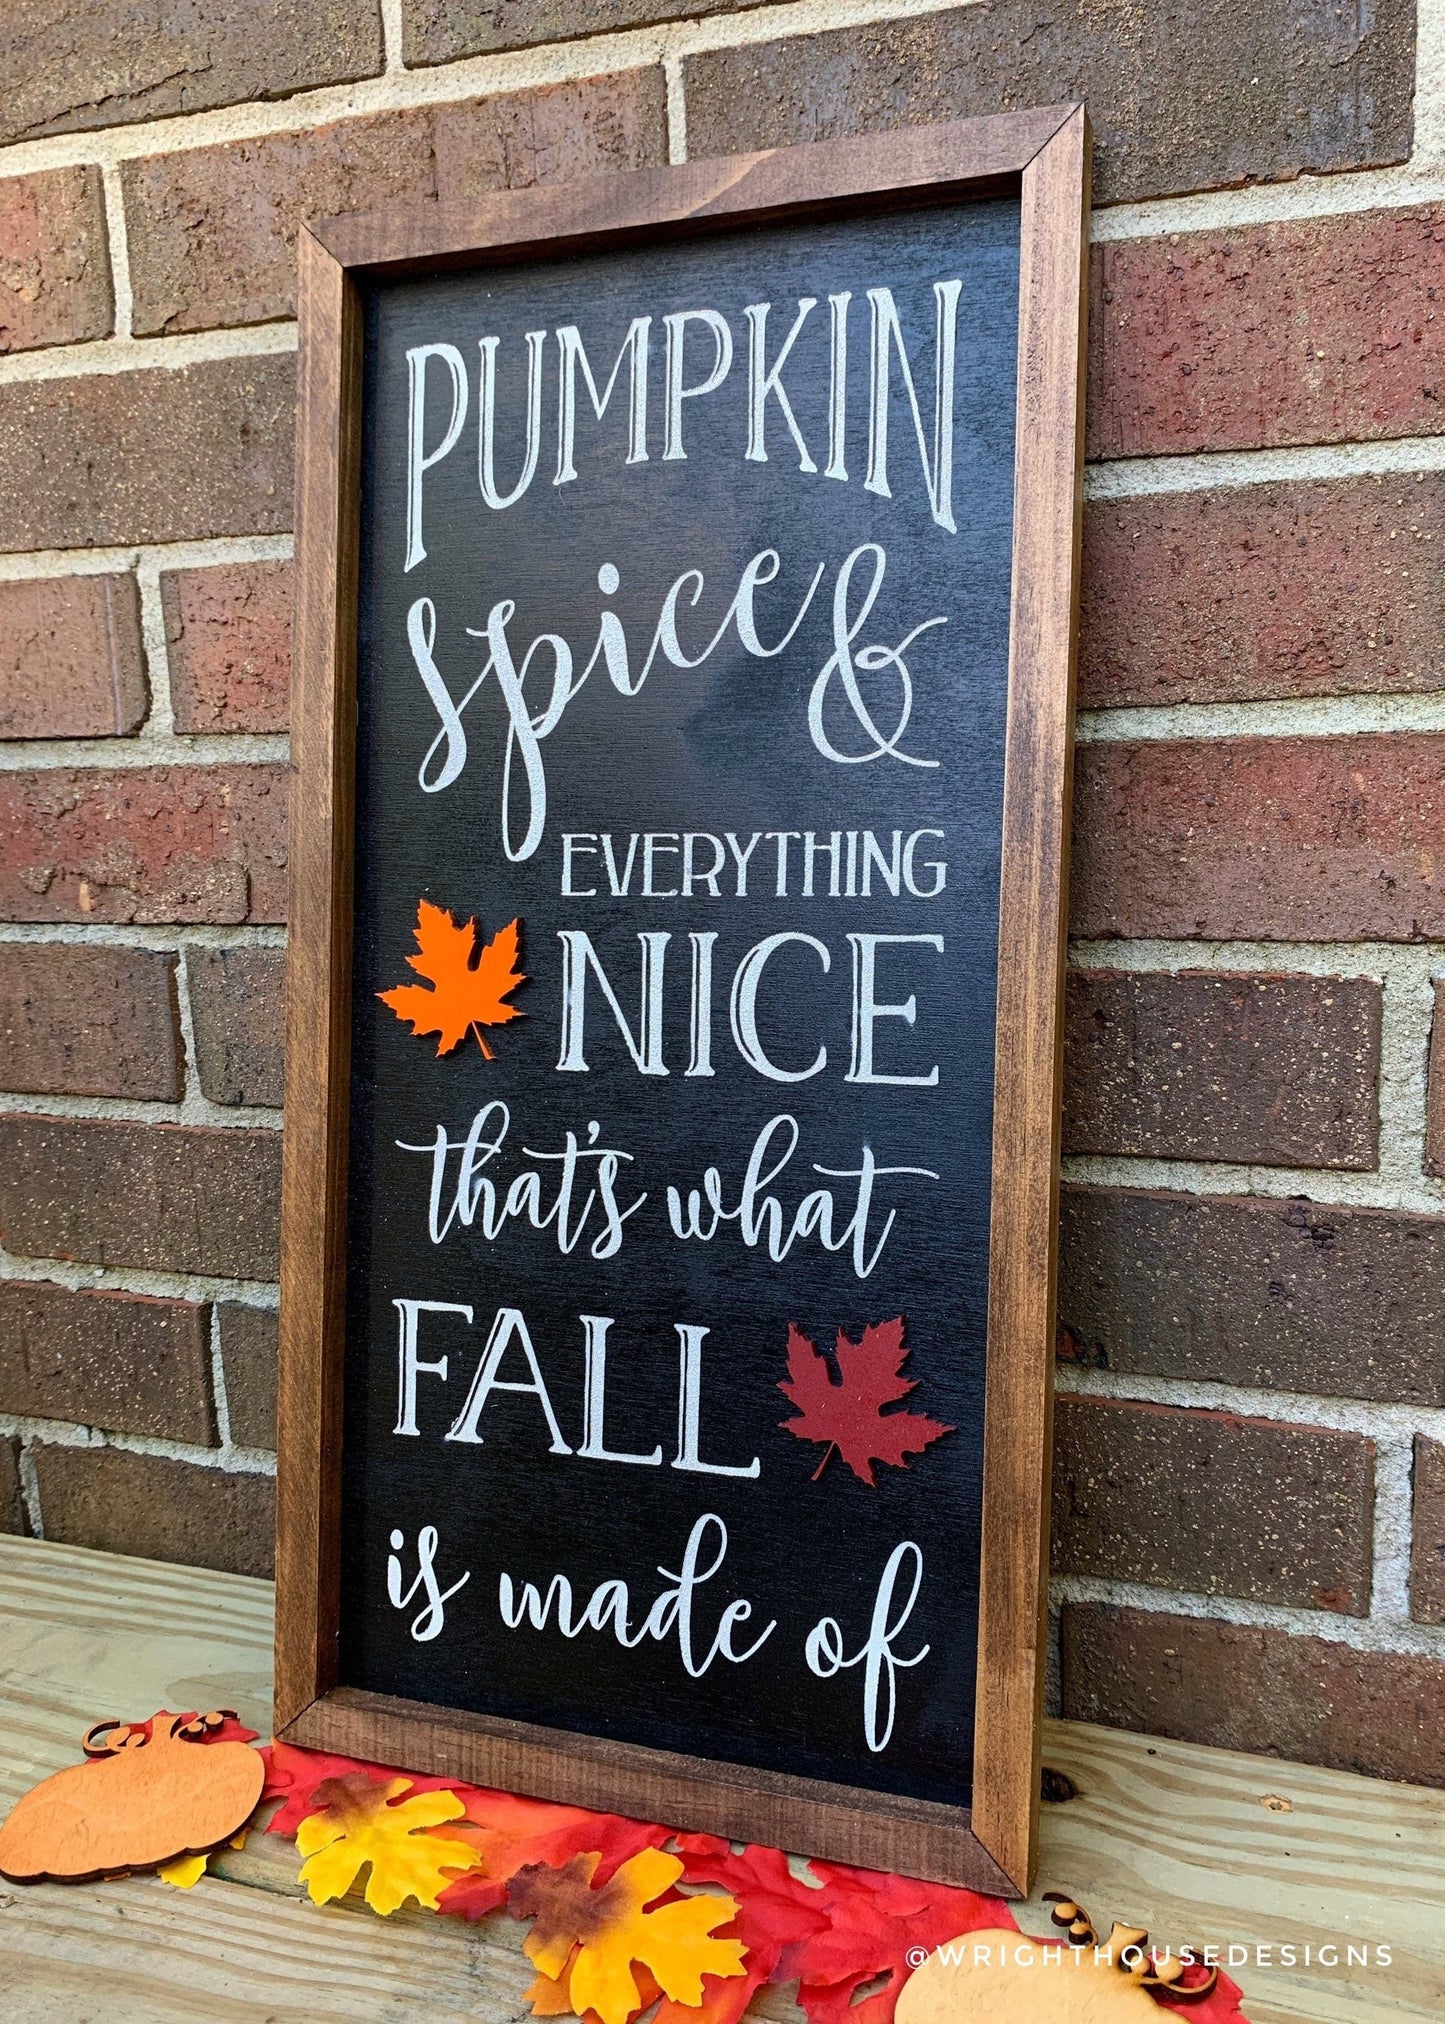 Pumpkin Spice and Everything Nice - Coffee Bar Sign - Country Cottagecore - Fall Farmhouse Home Decor - Entry Table Decor - Framed Wall Art